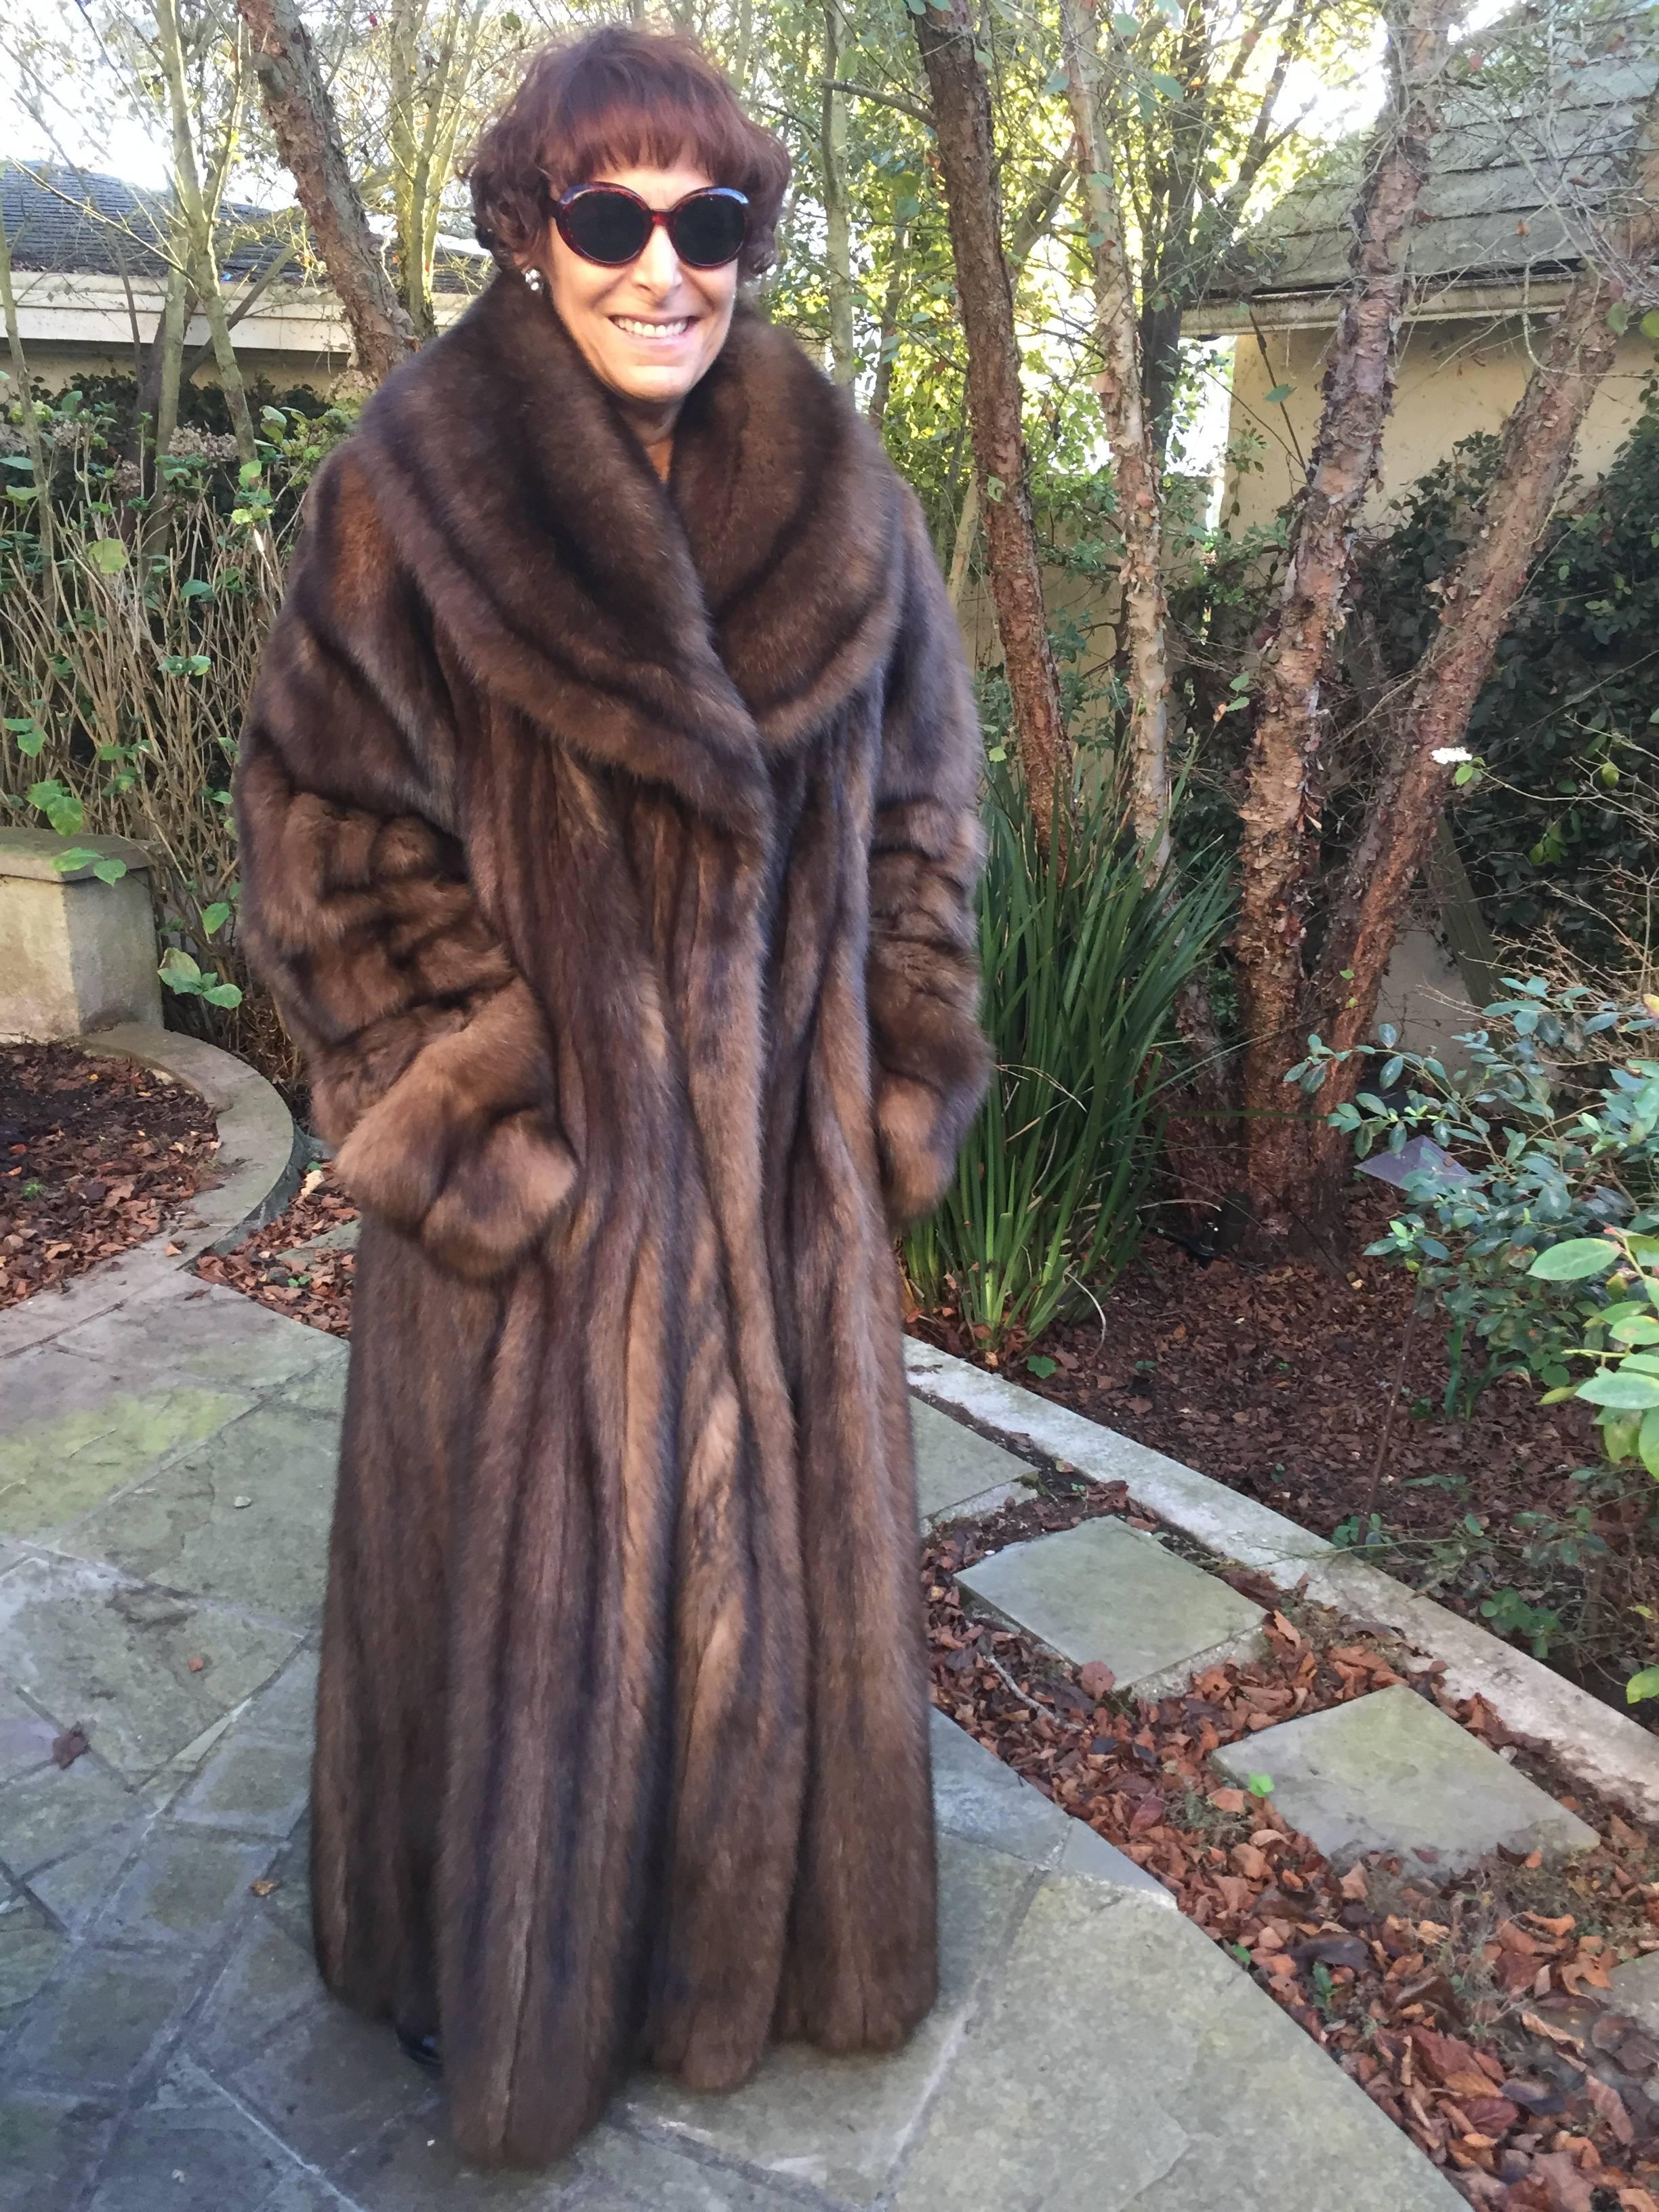 Luxurious floor length Russian Sable coat from the fur department at Neiman Marcus.
Hard to find larger size, this sweeps the floor and is incredibly soft and luxurious.
Would fit a man, see last photo. Model 5' 7